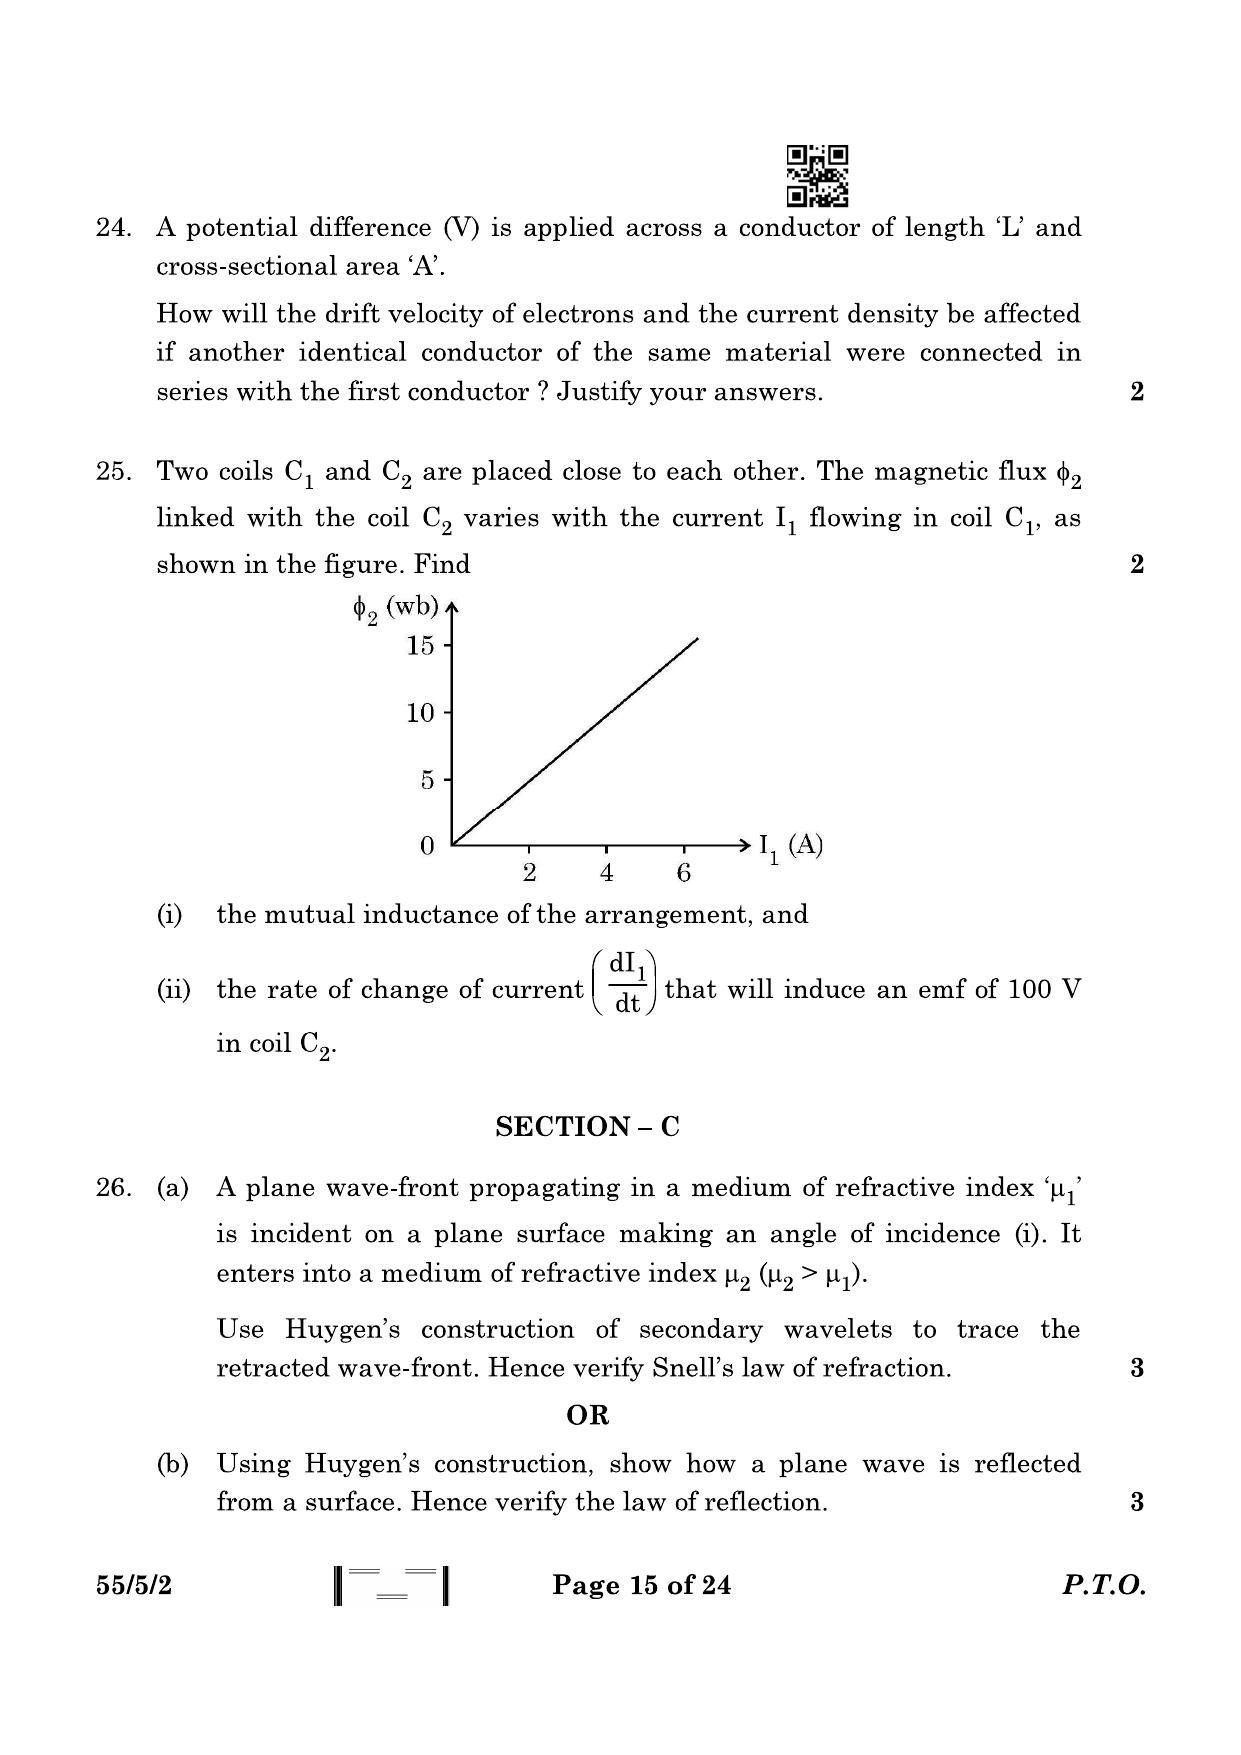 CBSE Class 12 55-5-2 Physics 2023 Question Paper - Page 15